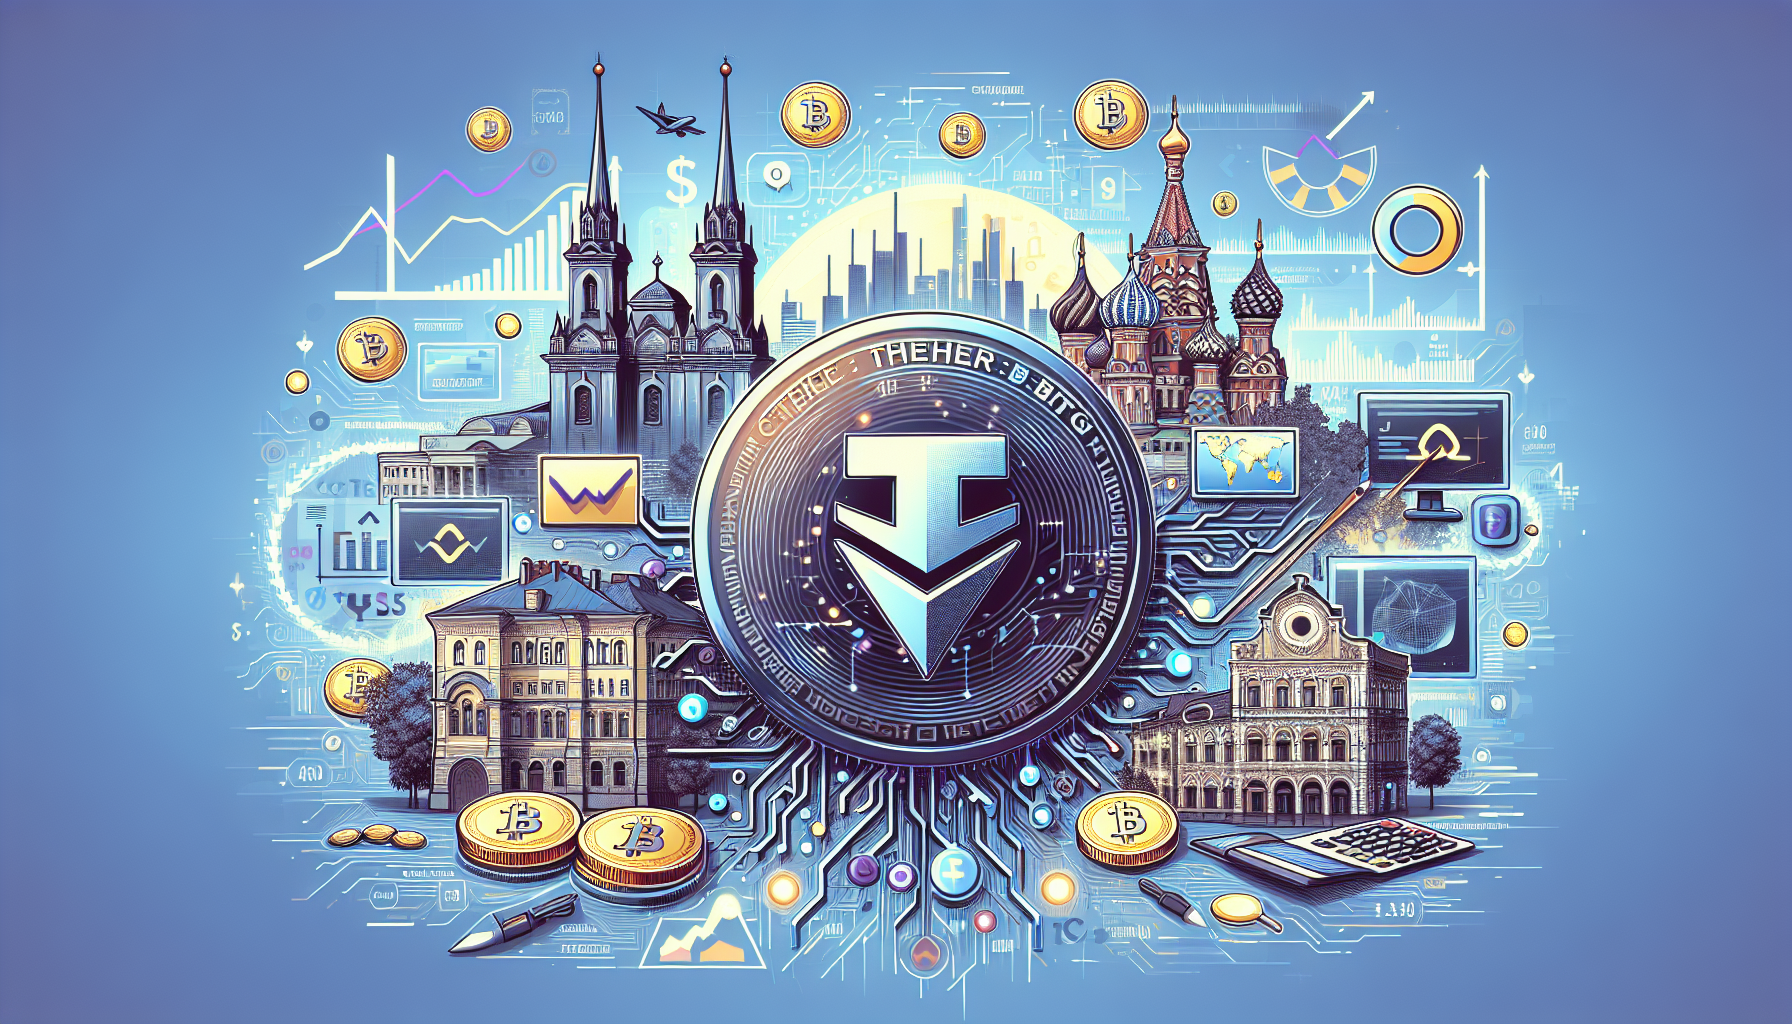 Tether’s Investment in Crypto Companies in Eastern Europe